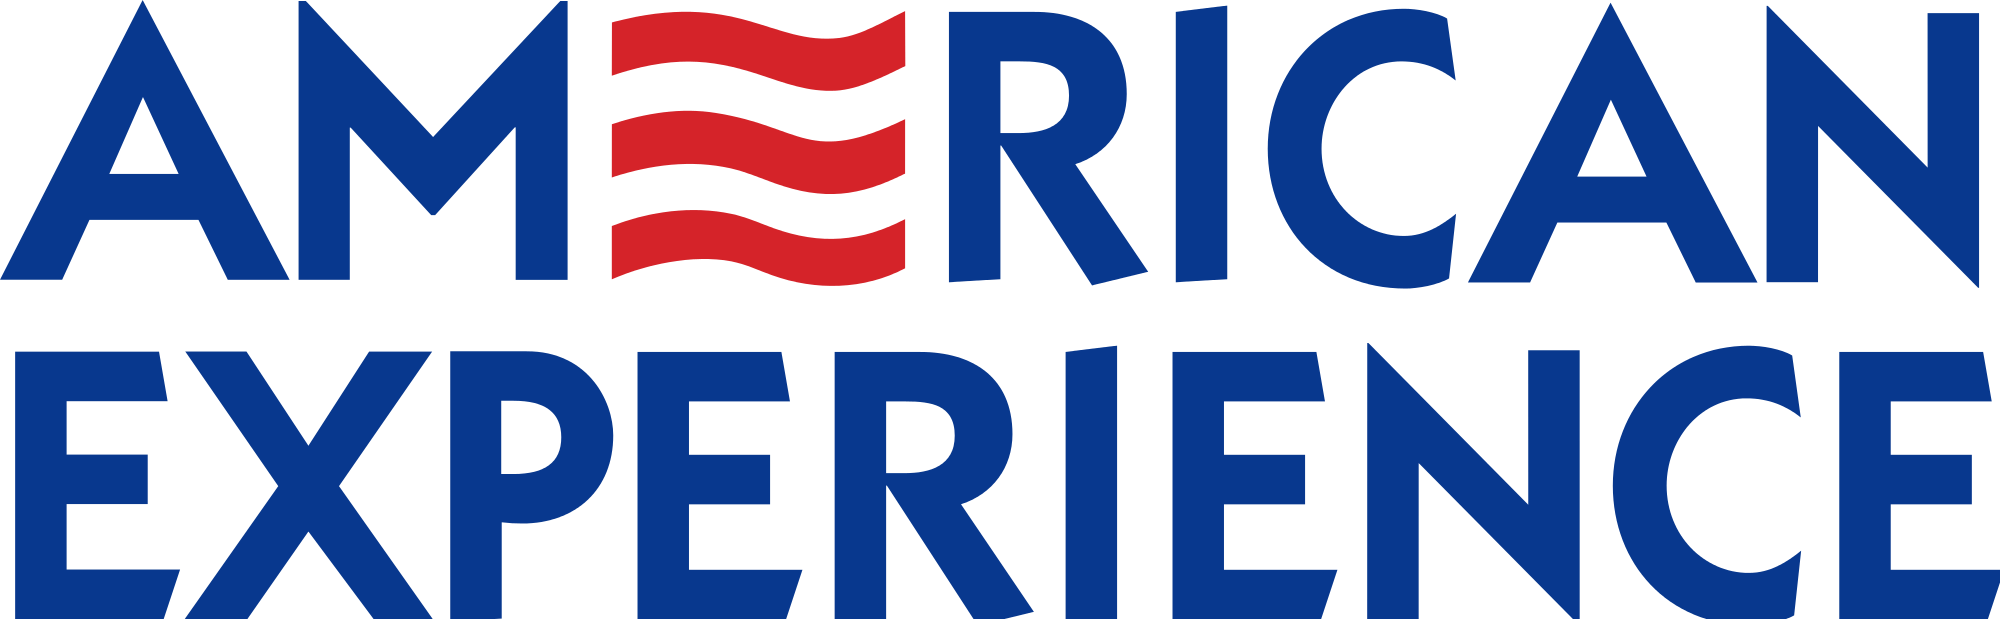 American Logo - File:American Experience logo.svg - Wikimedia Commons